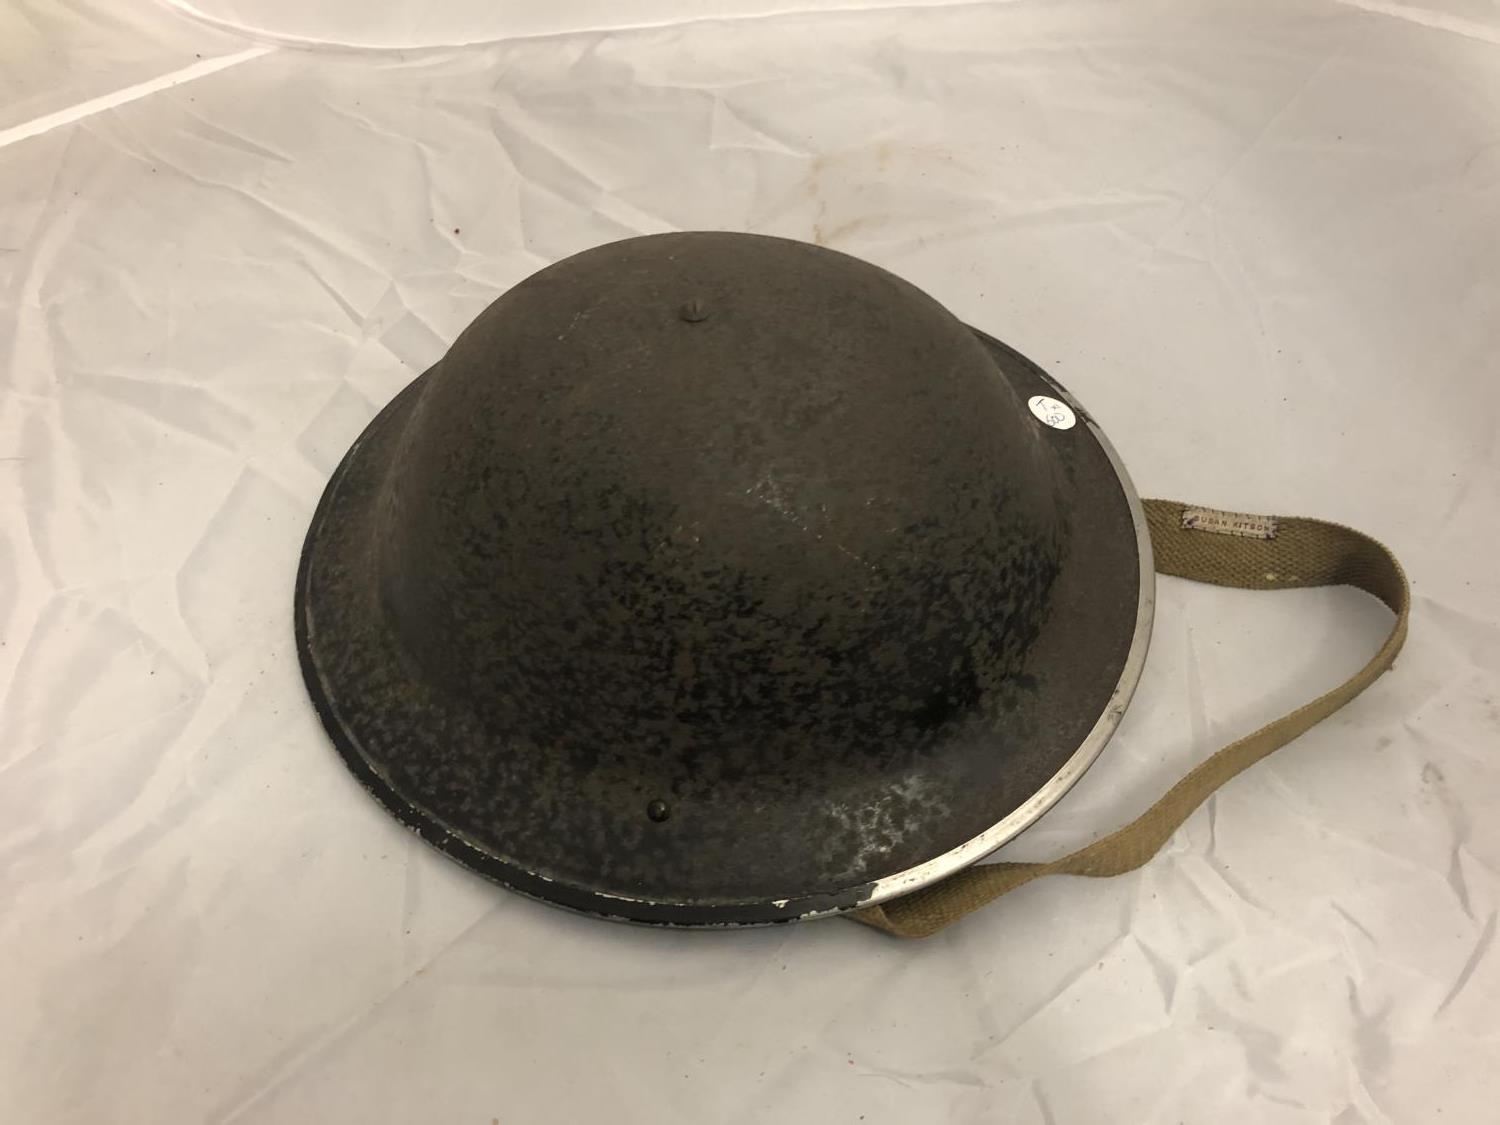 A WWII BLACK PAINTED MILITARY HELMET